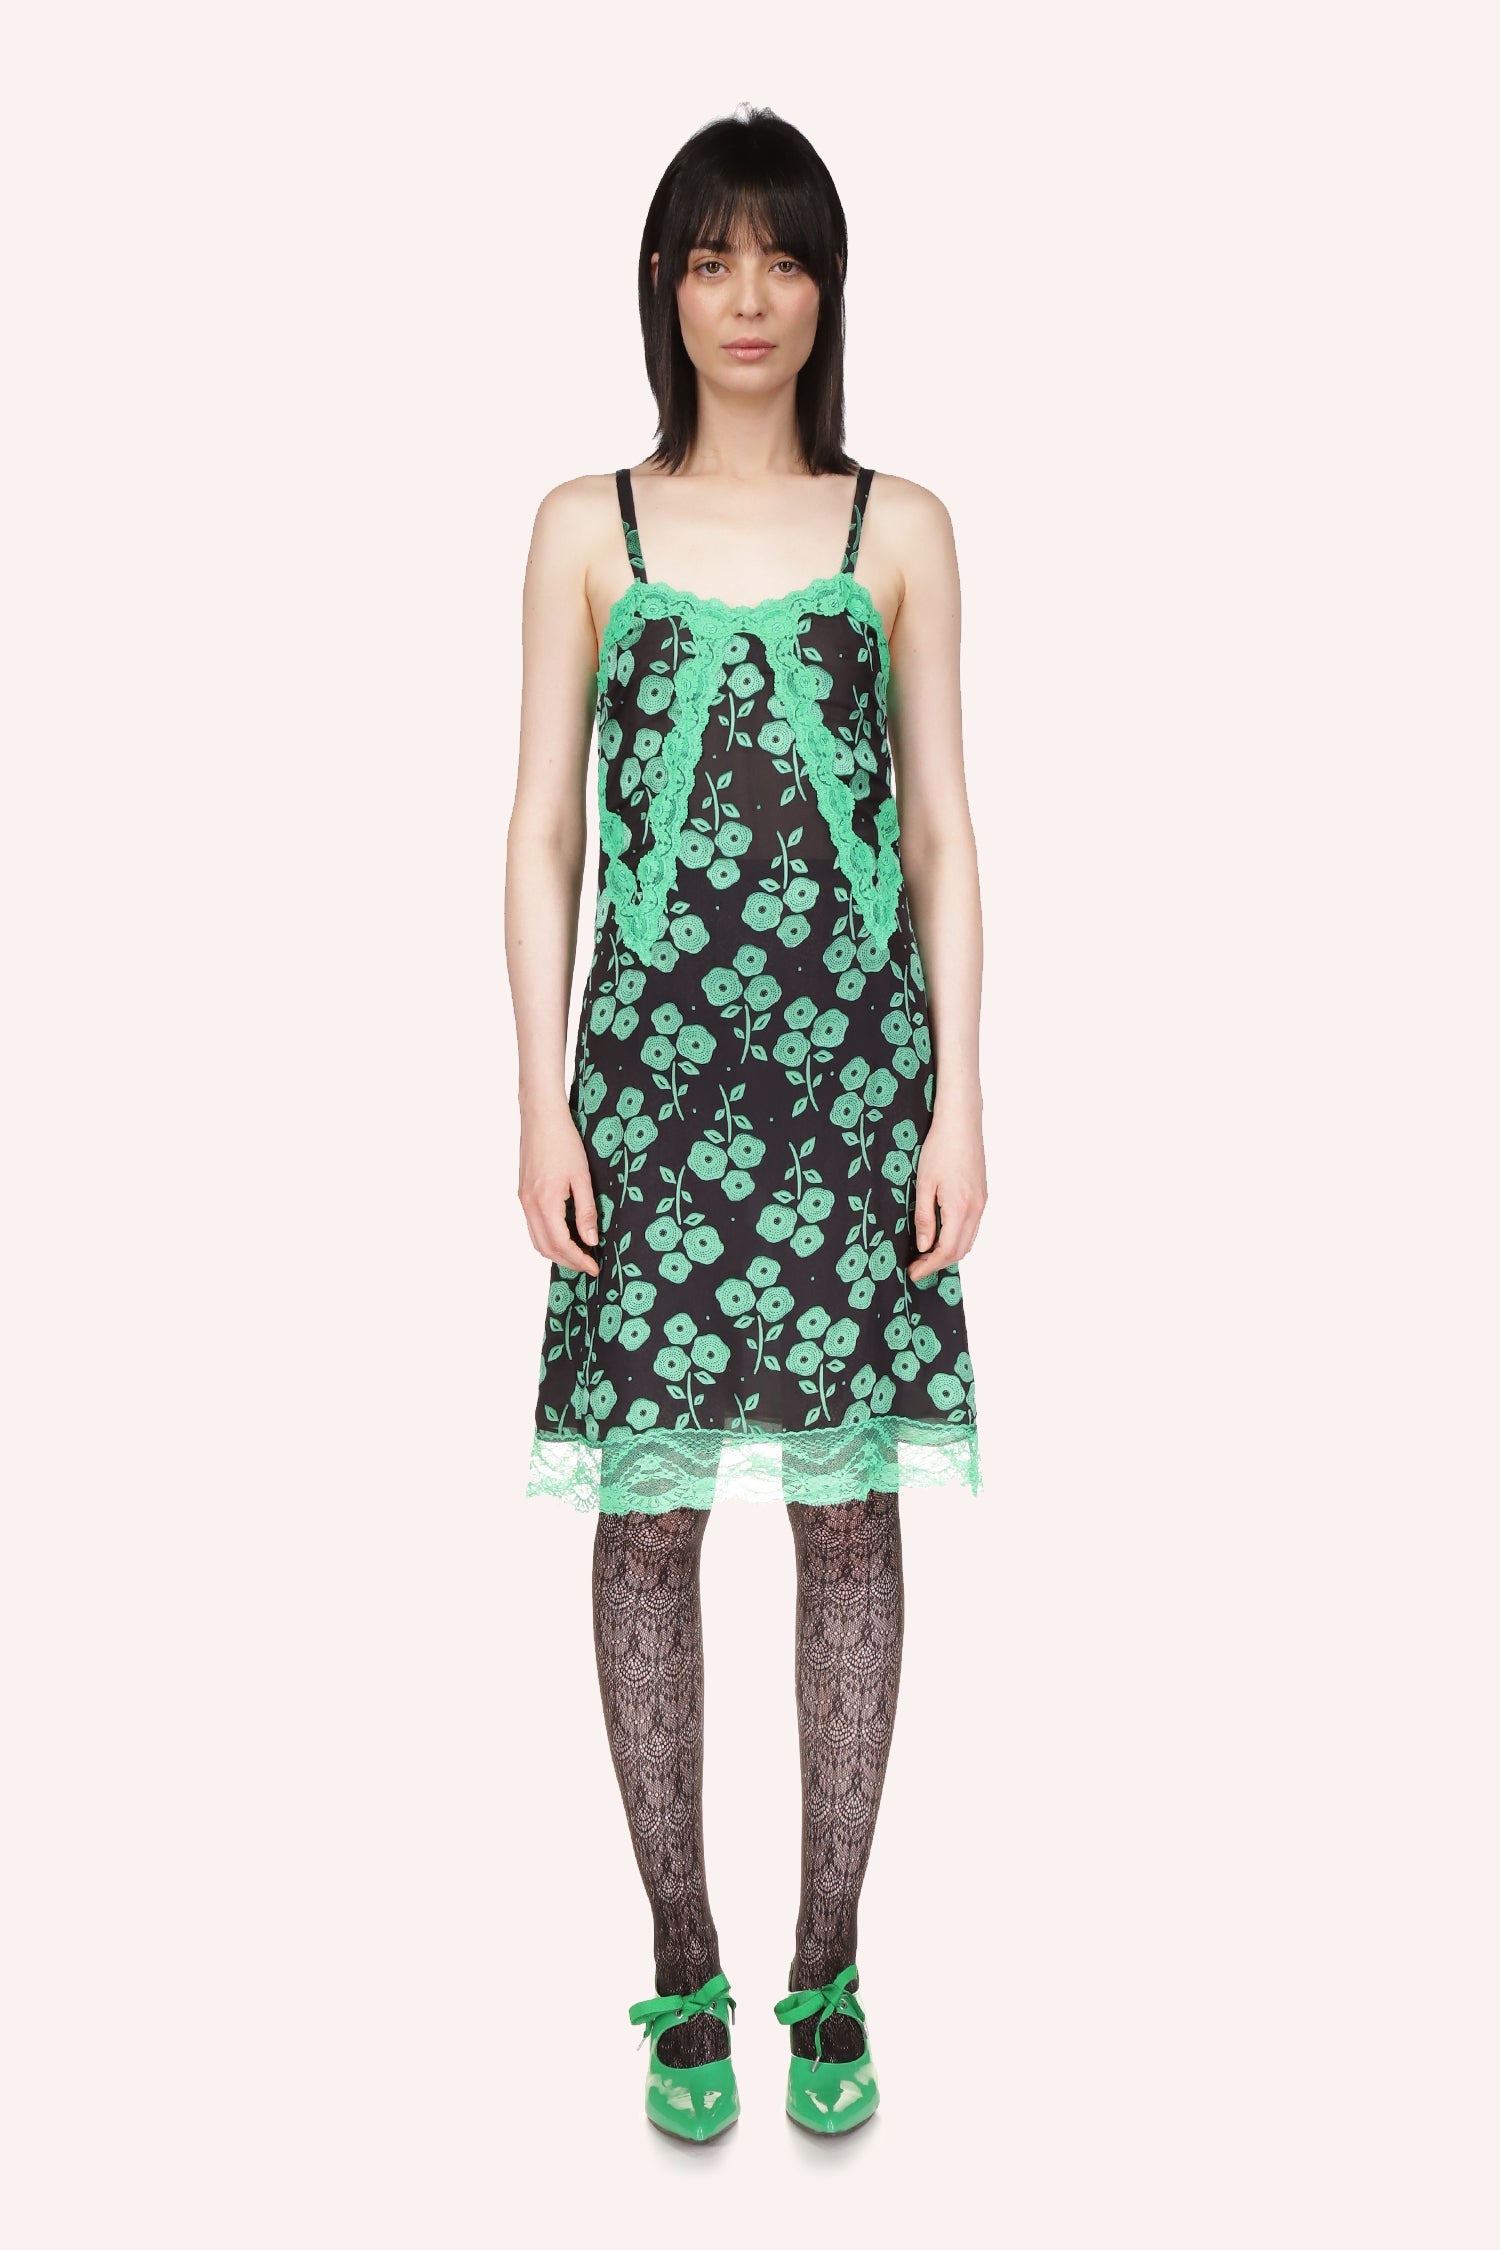 Anna Sui's Stitched Poppies Dress, verdant petals on a black base, sleeveless, 2-straps, knees-long, green lace at the bottom